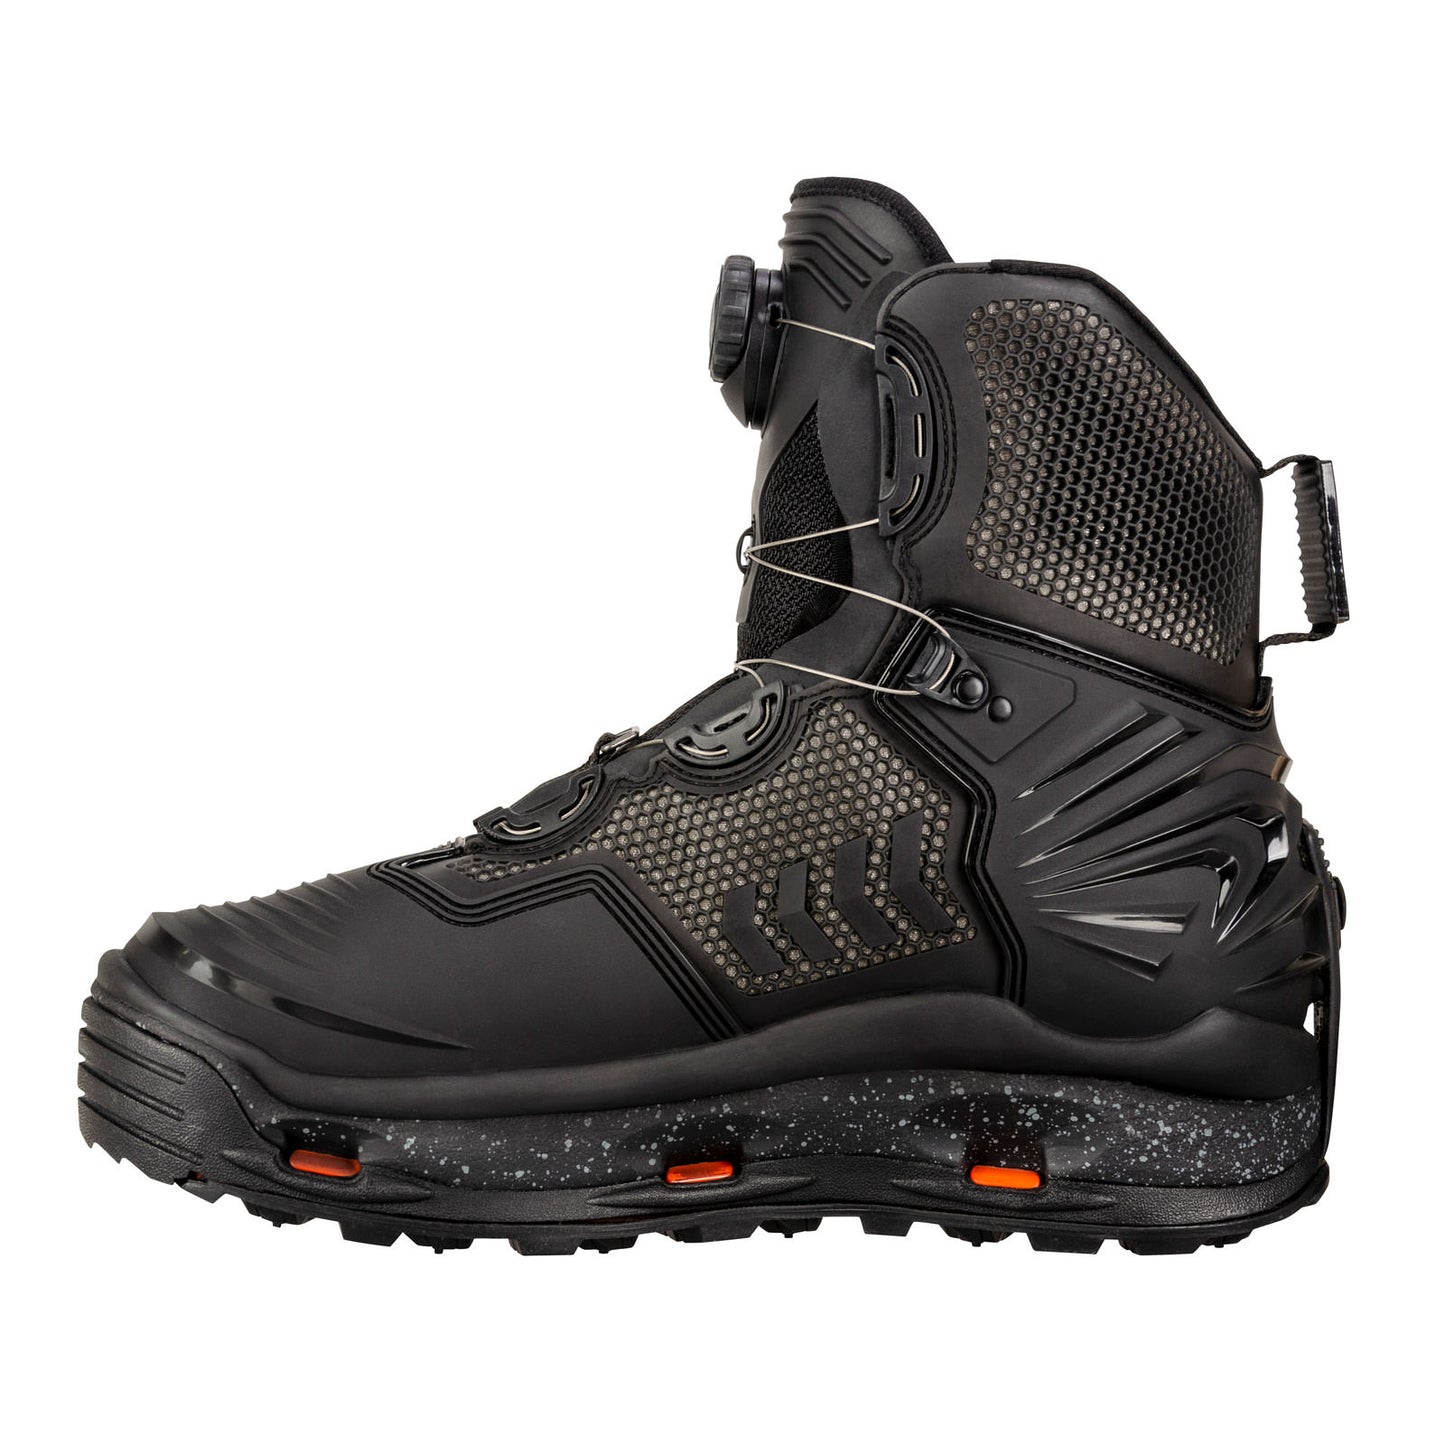 Korkers River Ops BOA Fishing Boot with Felt & Vibram Soles